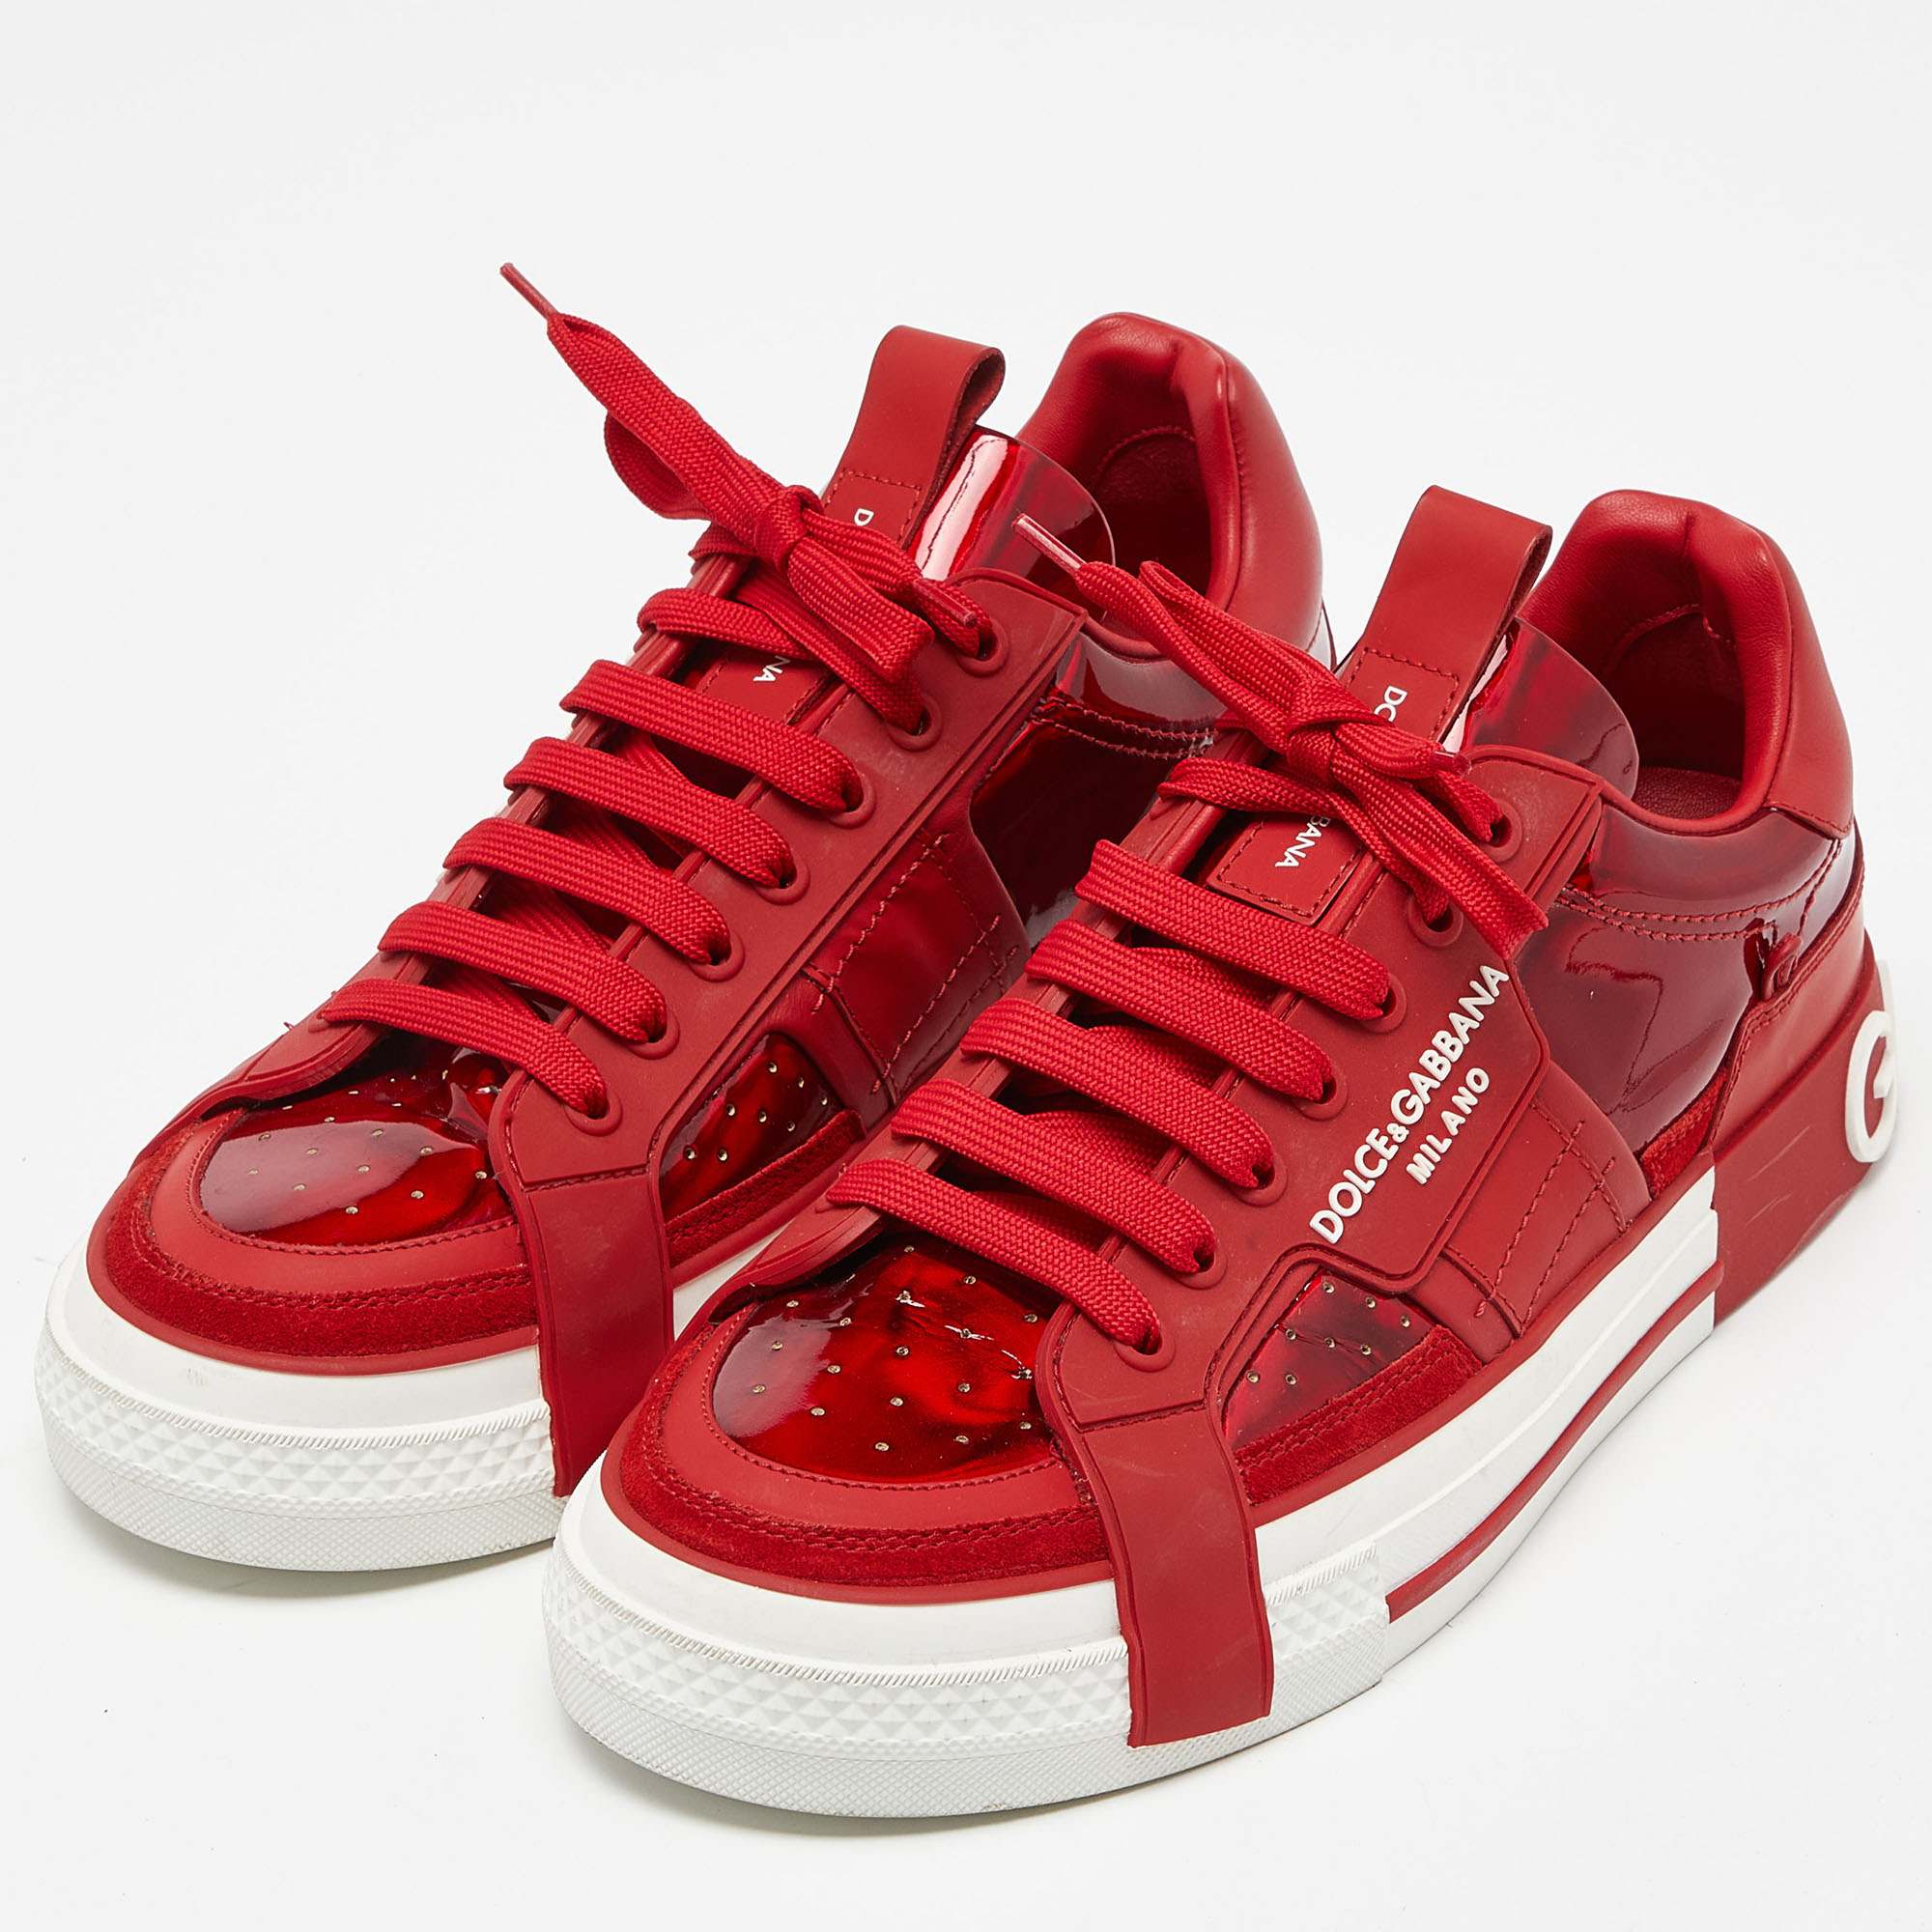 

Dolce & Gabbana Red Leather and PVC Custom 2.Zero Sneakers Size